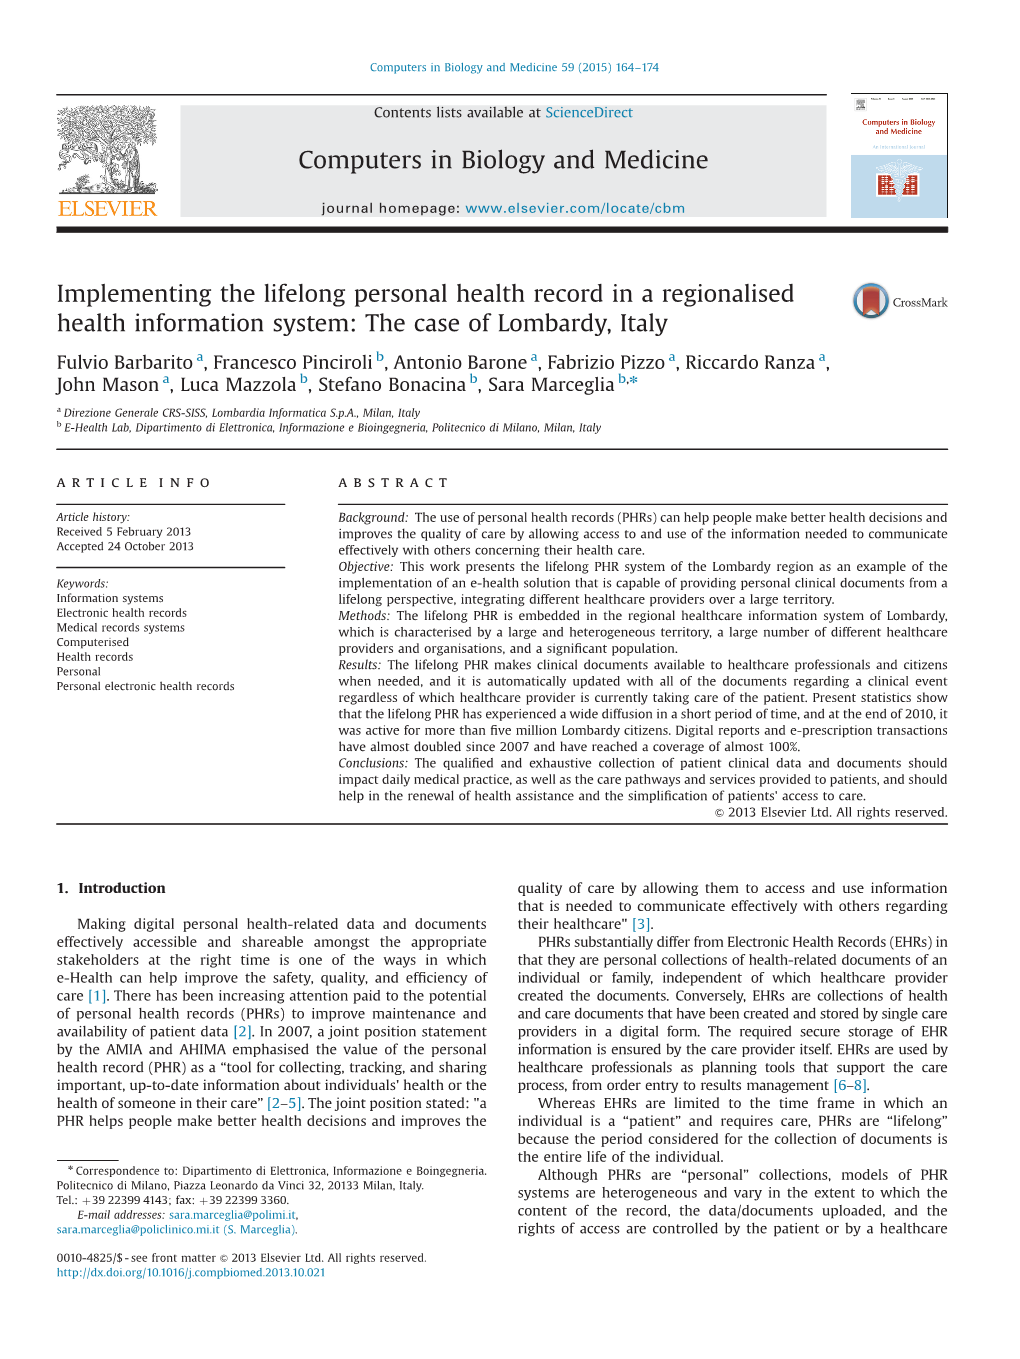 Implementing the Lifelong Personal Health Record in a Regionalised Health Information System: the Case of Lombardy, Italy